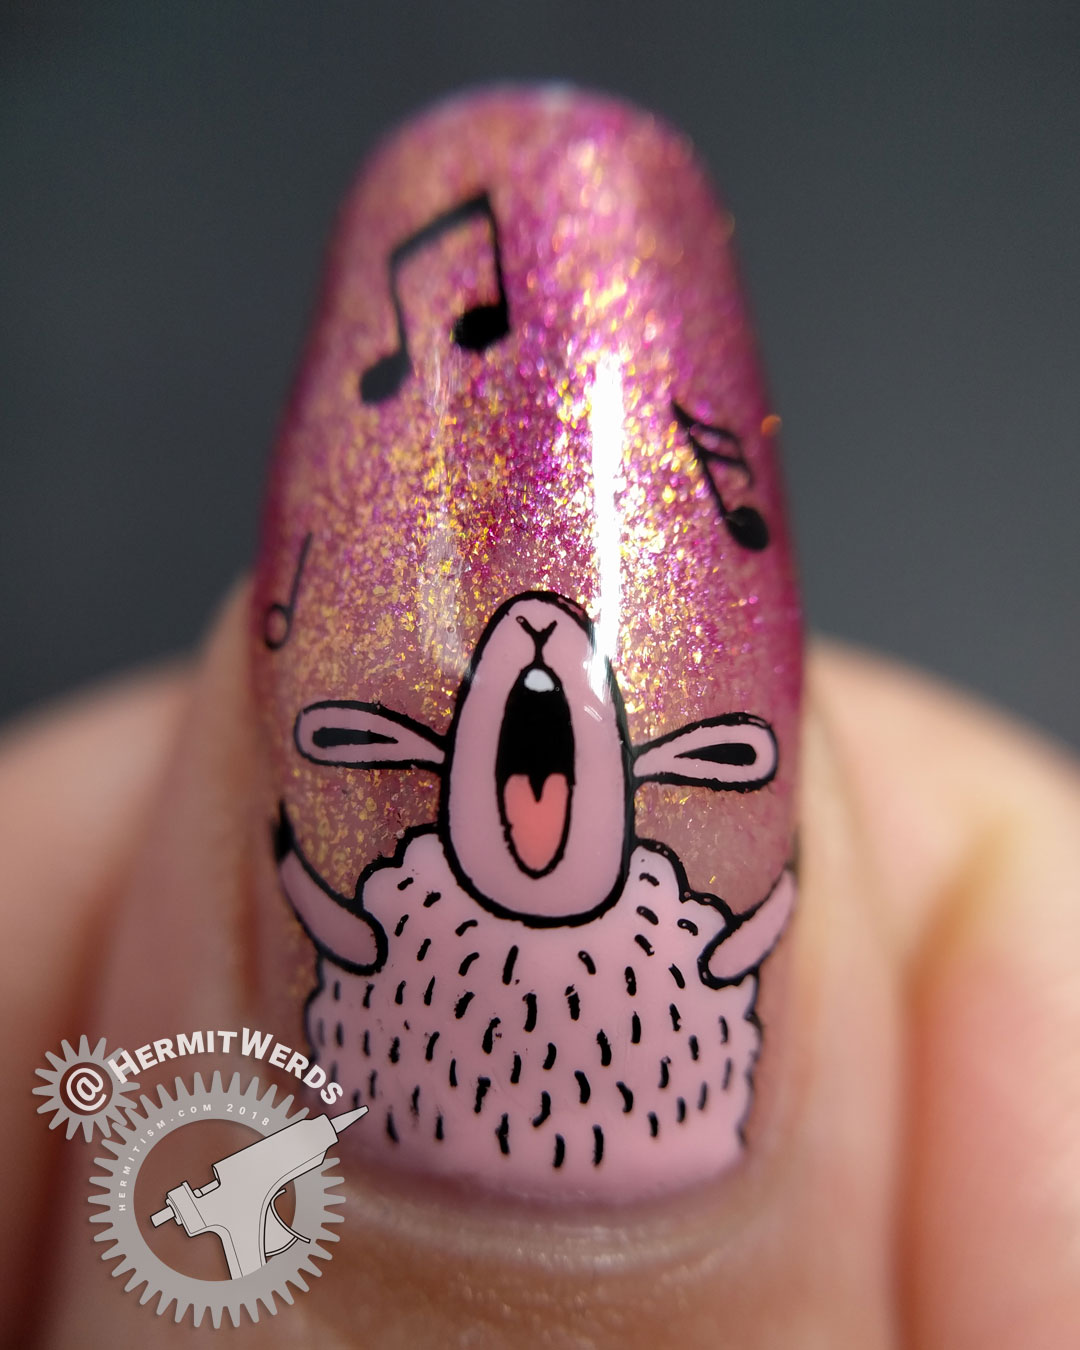 Christmas Carolers - Hermit Werds - nail art of a pig, a pug (dog), two cats, and a sheep singing Christmas carols against a shimmery background in purple to orange to raspberry tones